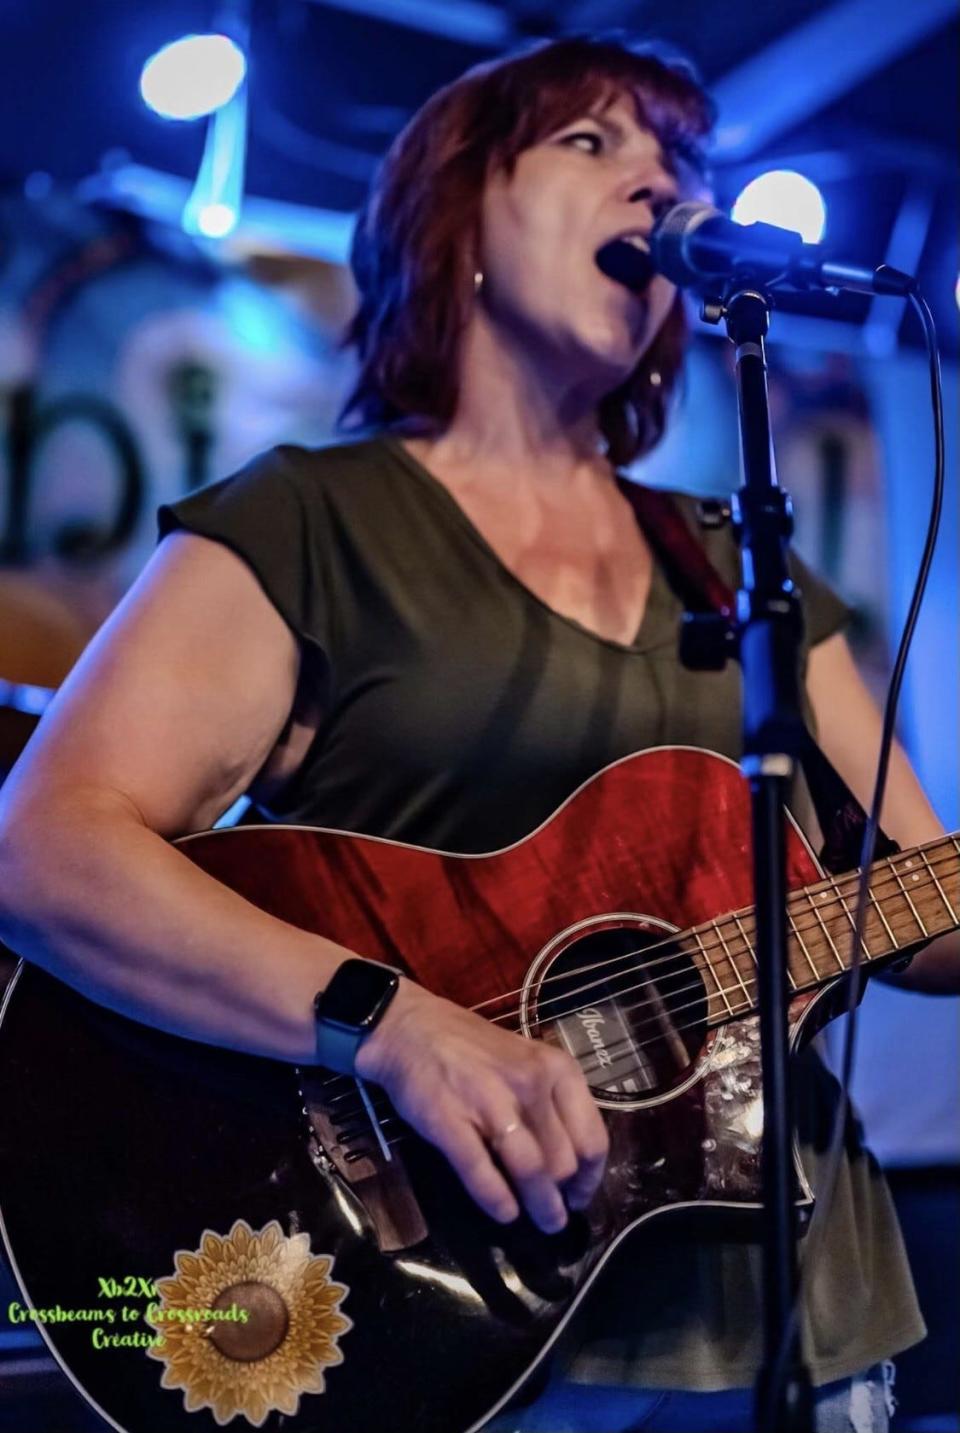 Anna Holloway performing live.